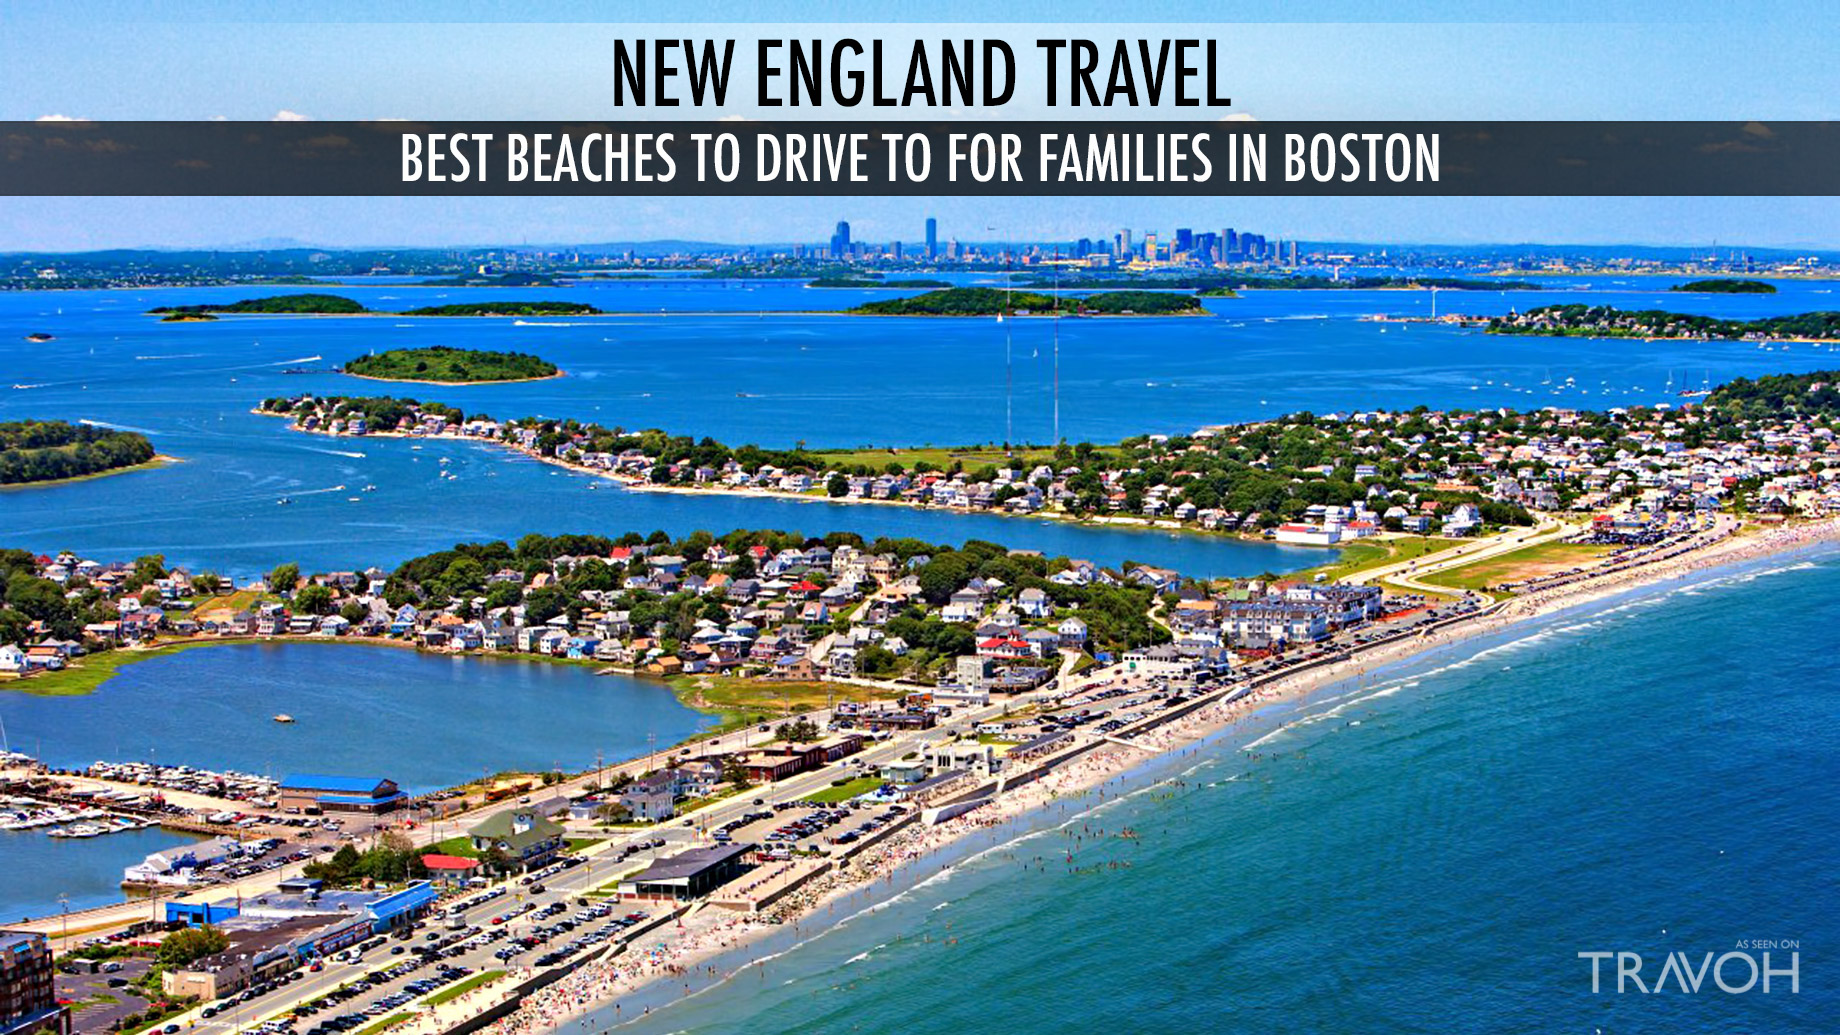 New England Travel - Best Beaches to Drive to for Families in Boston